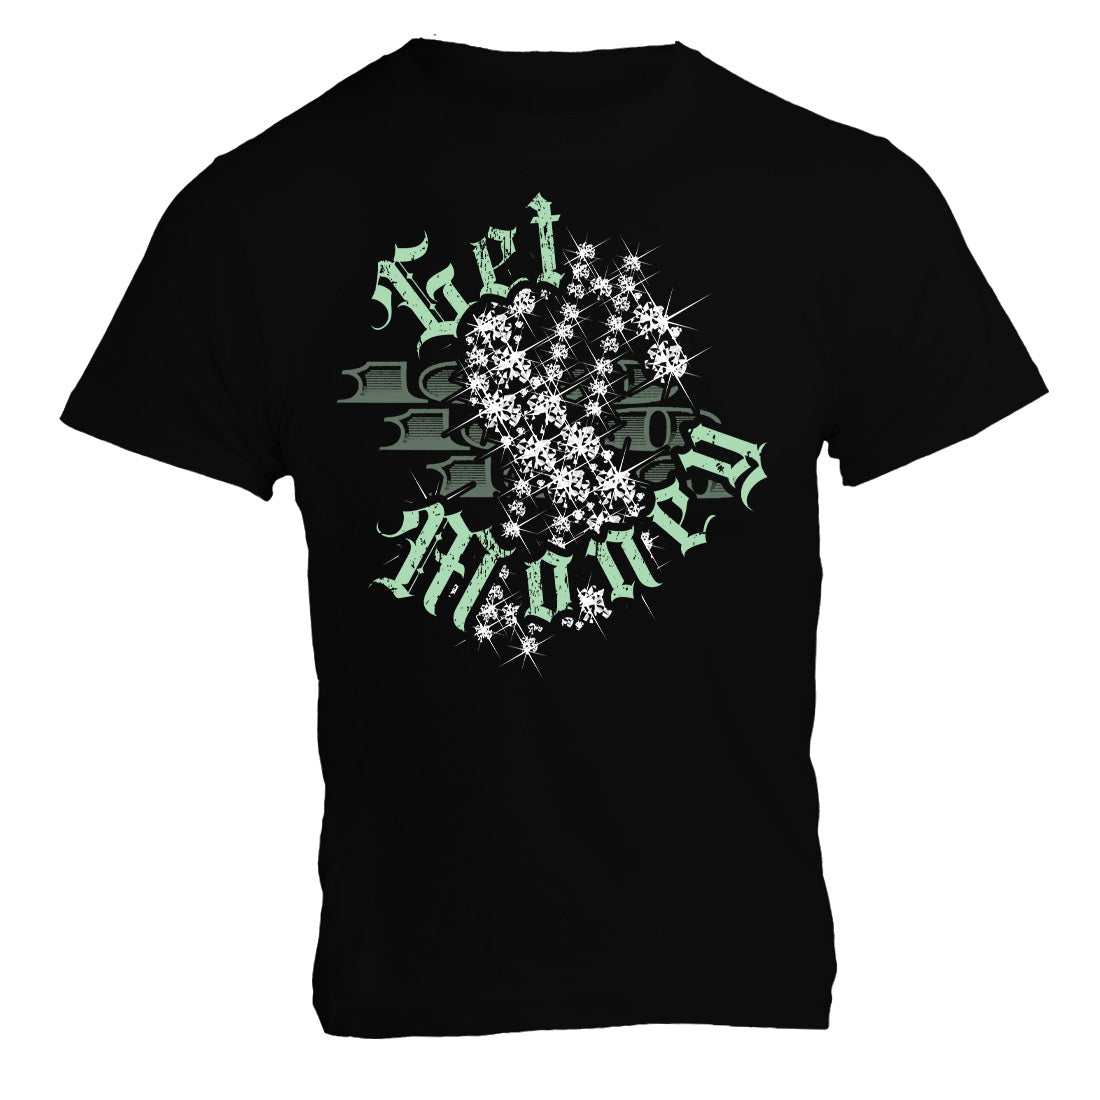 Get Money Tee - Skull and Crossguns • Bling Dollar Sign and 100 US Dollar Bill Graphic